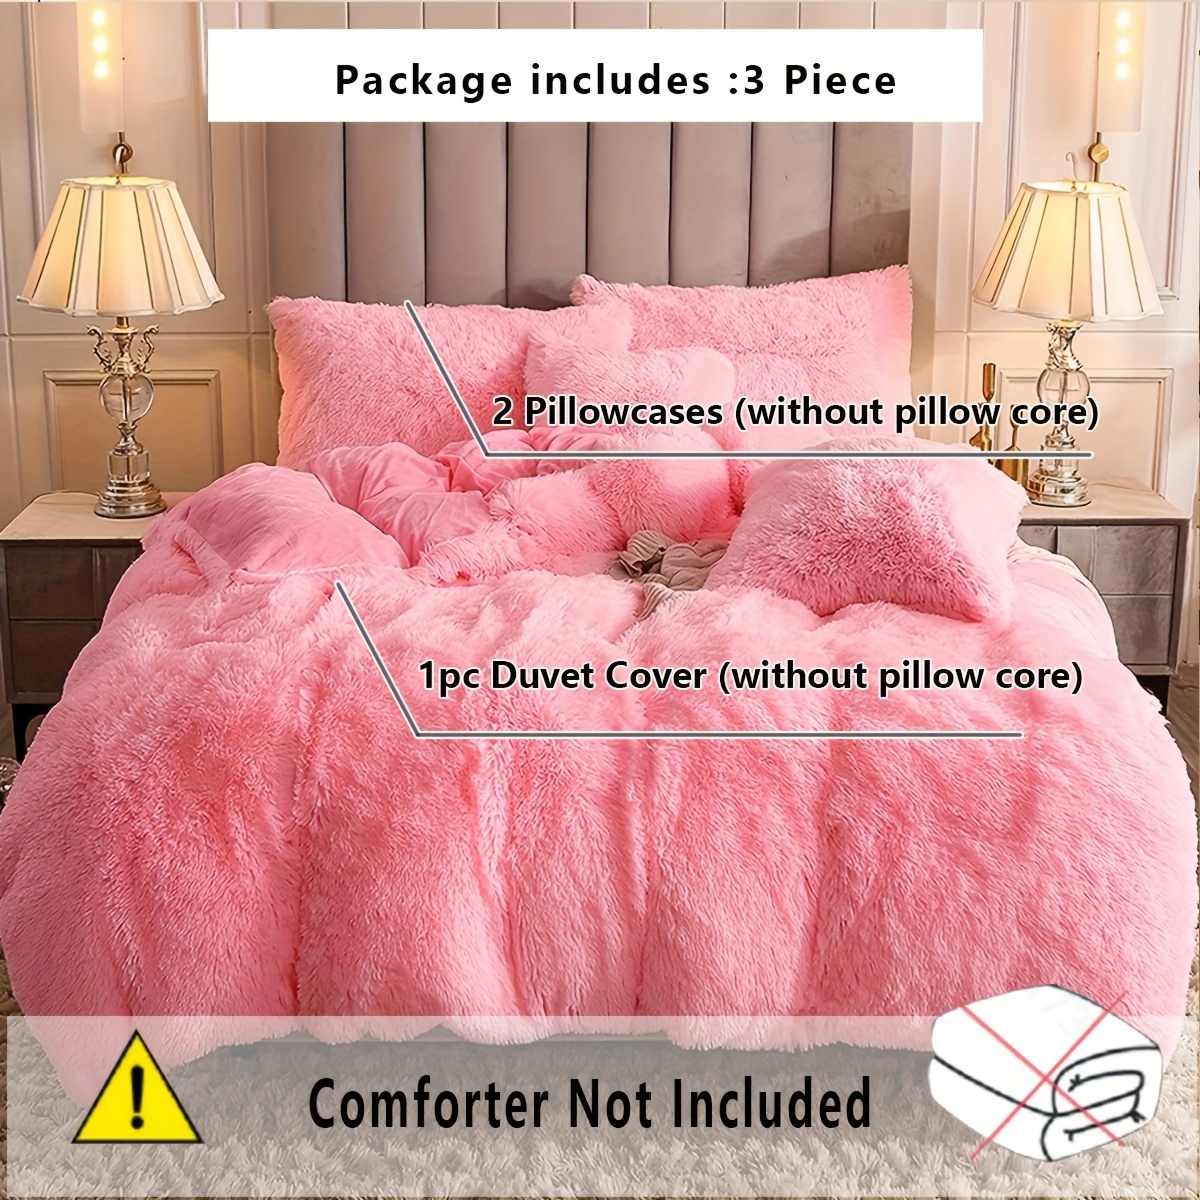 Pink Fluffy Comforter Queen Size with Filler, Soft Faux Fur Plush Comforter  3pcs(1 Plush Comforter +2 Furry Pillow Cases) Quilted Fuzzy Pink